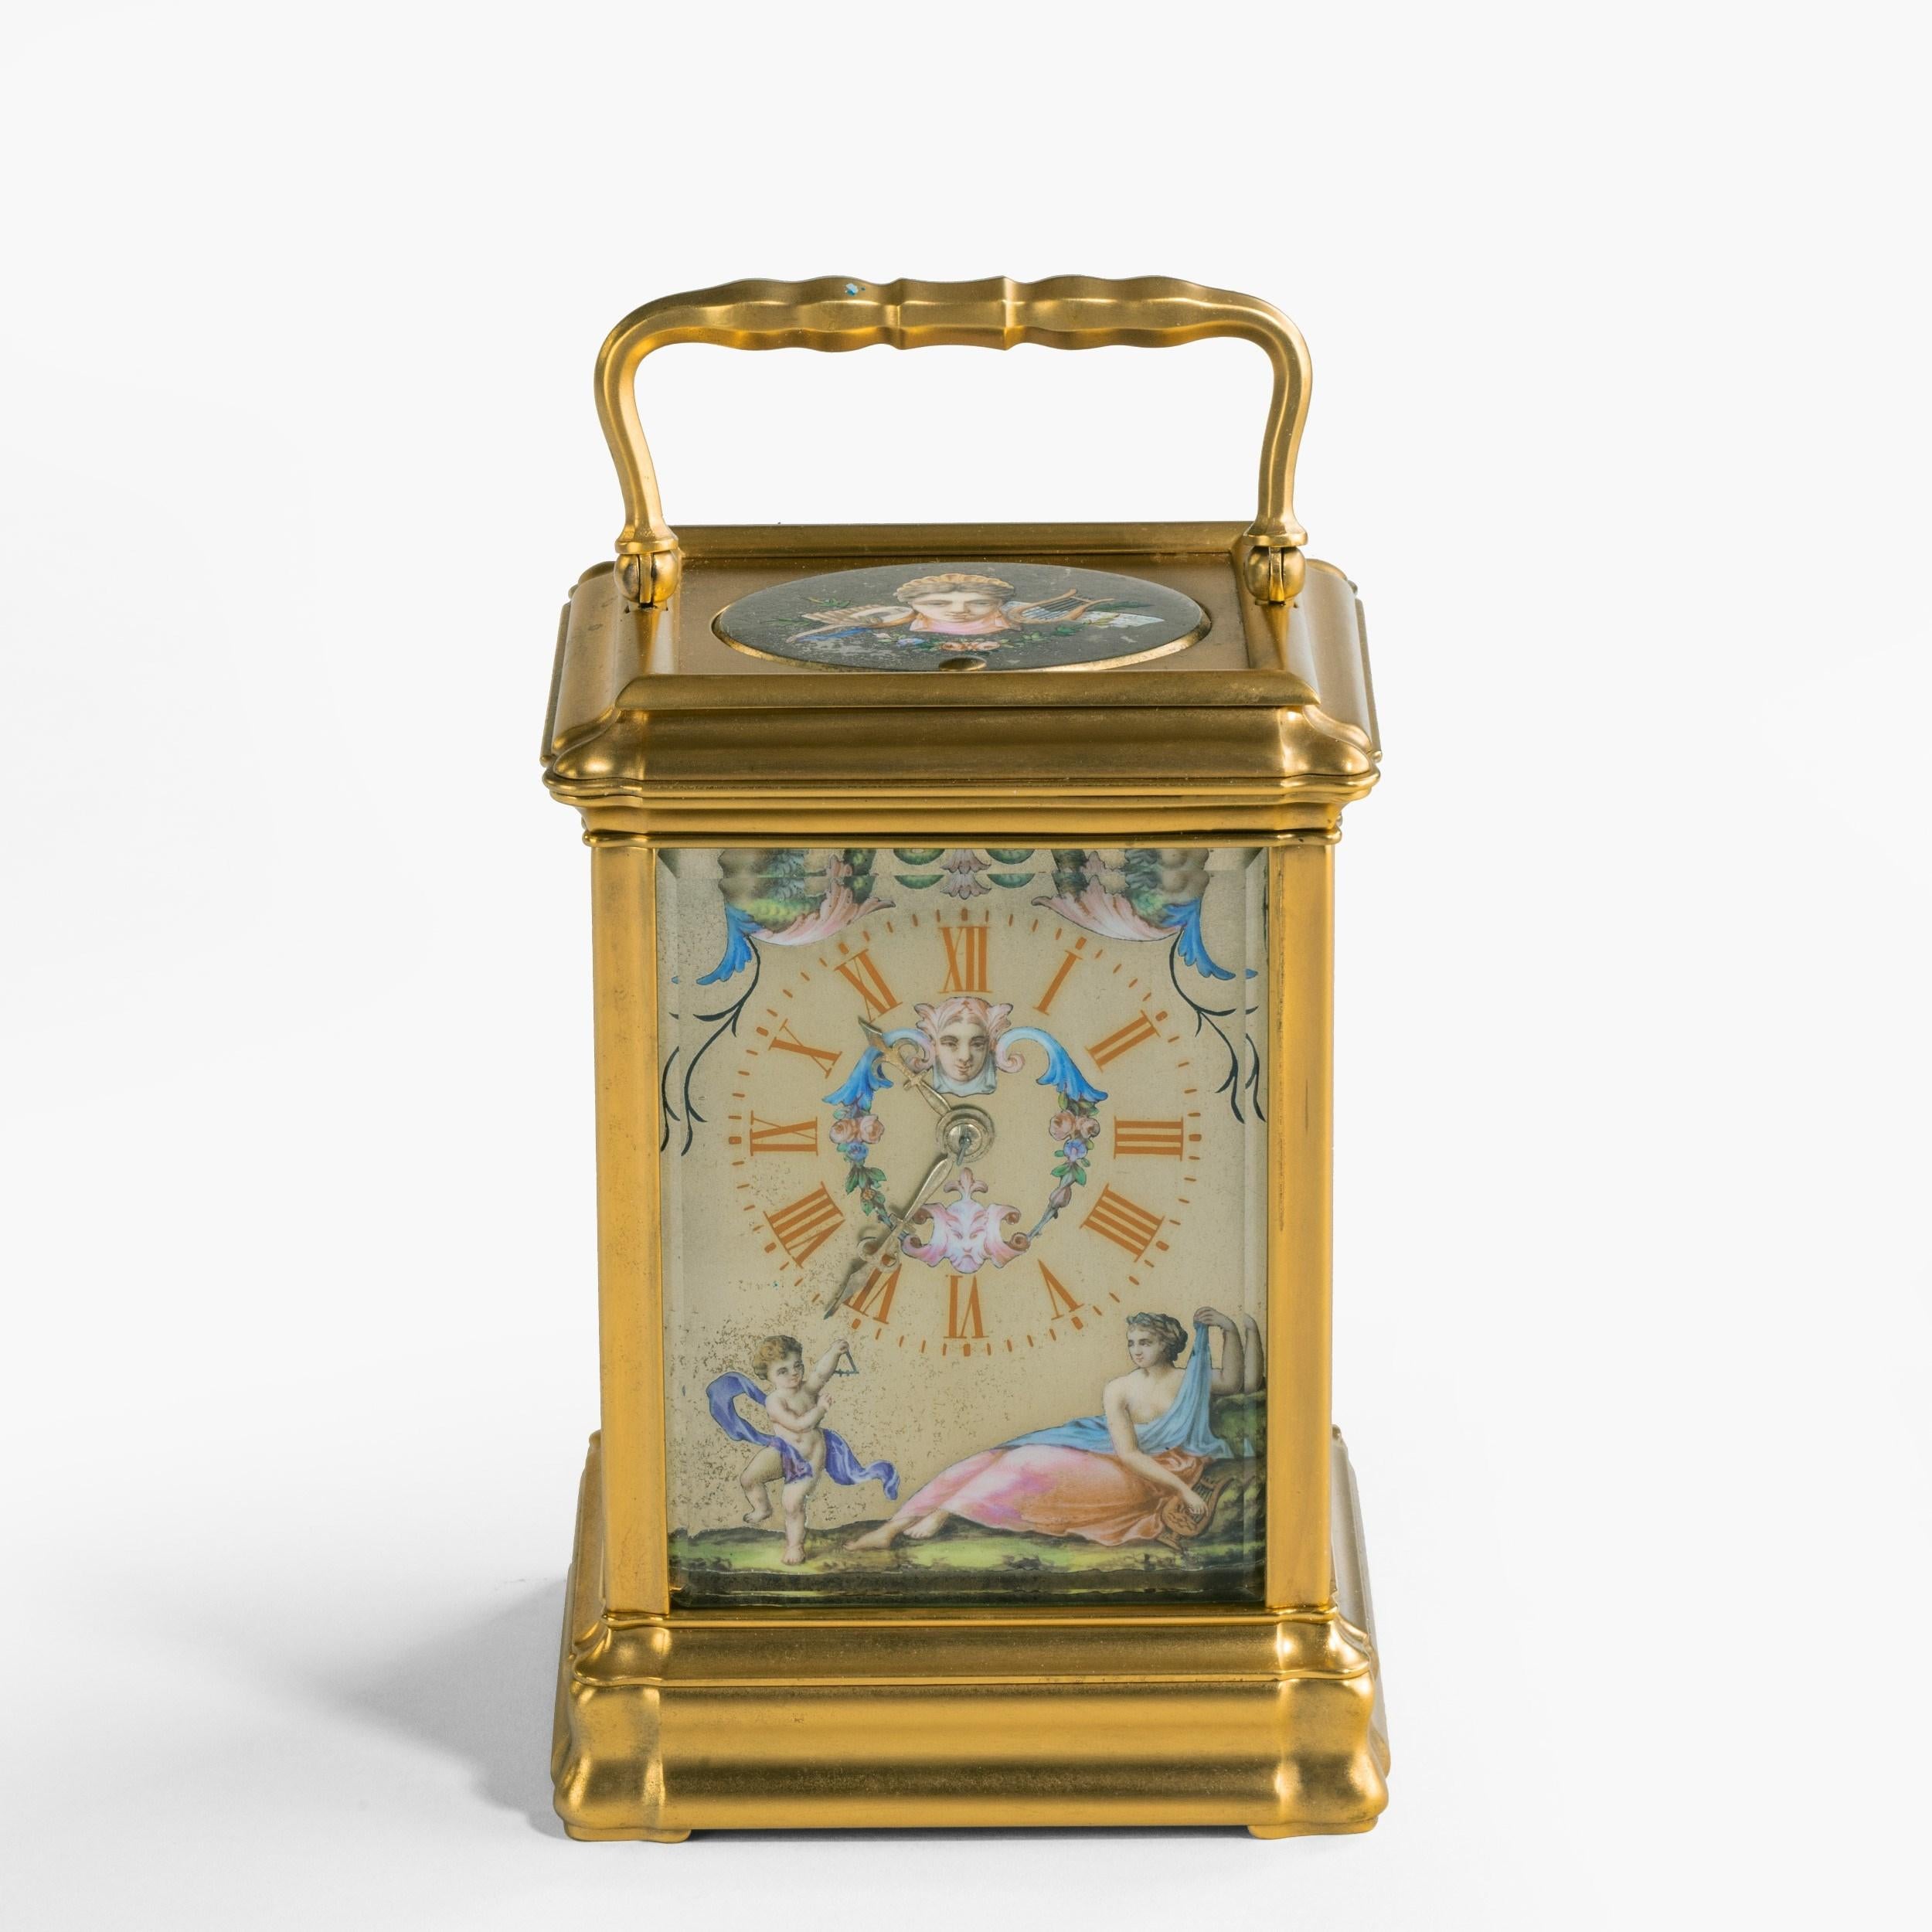 A fine cased carriage clock

The substantially sized 'Gorge' case houses a lever platform escapement, striking the hours and half hours on a blued steel coiled gong, with the repeat button atop, the bevelled glass face shows the hours delineated